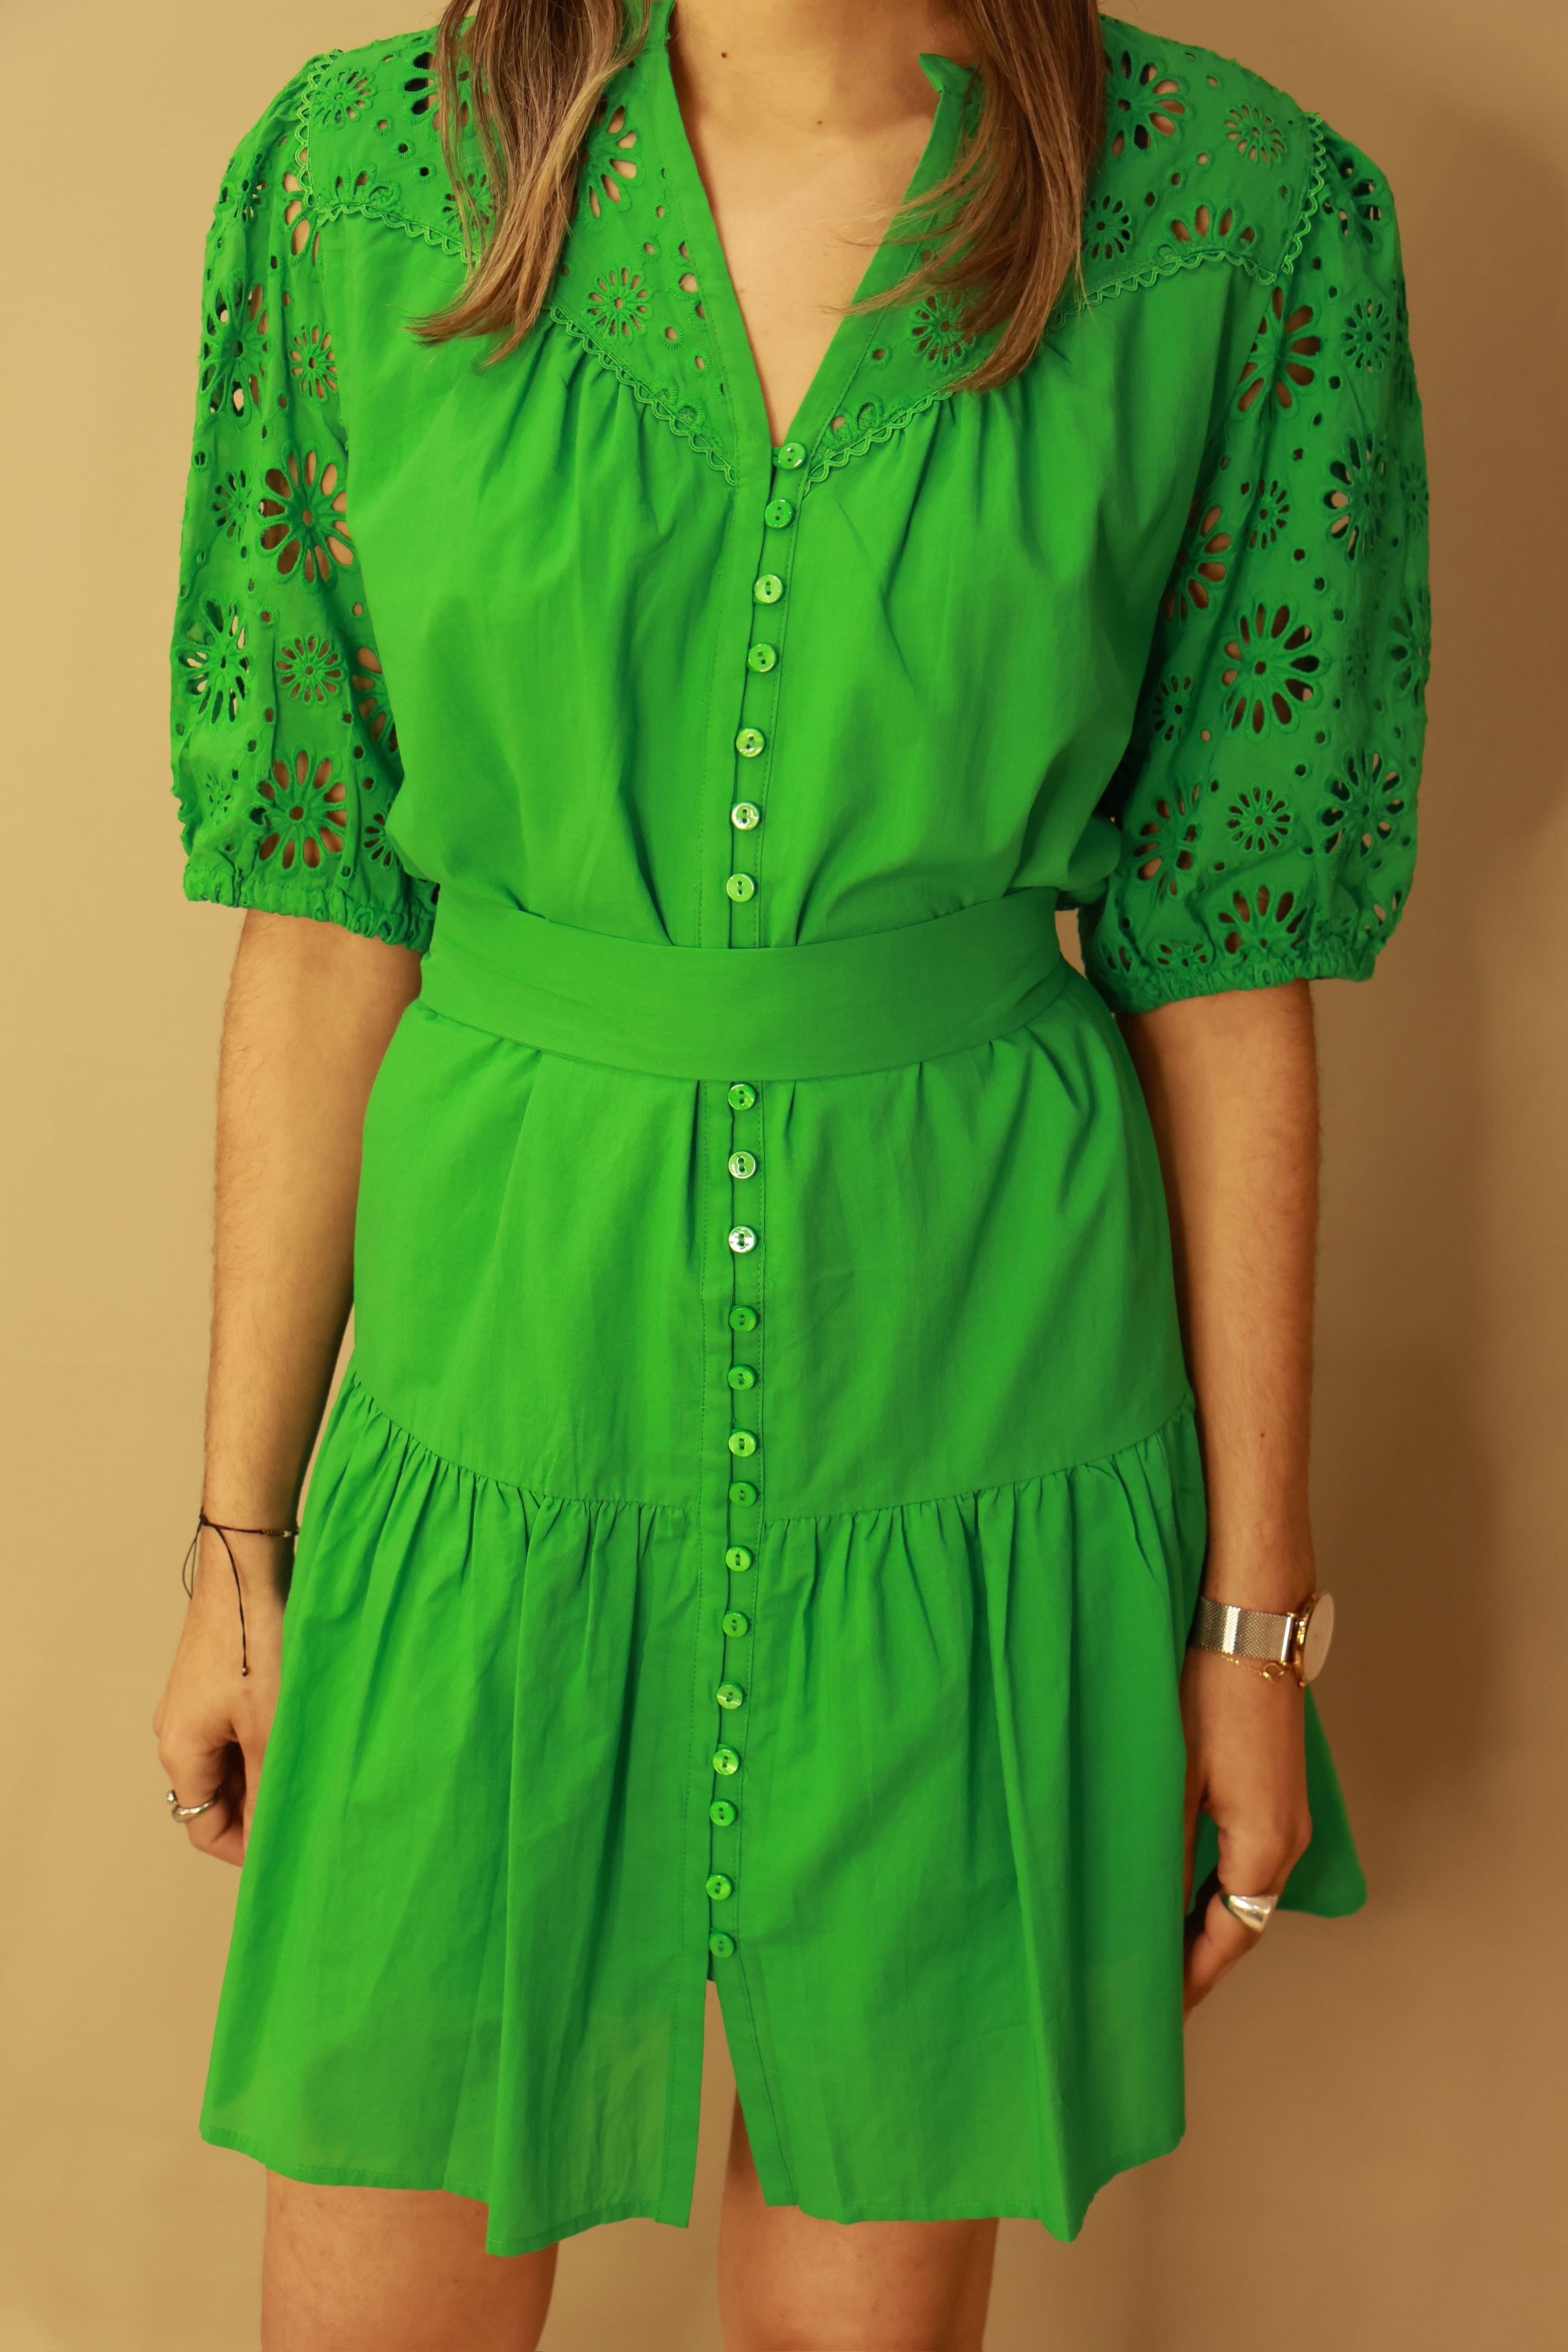 Robe vert Suncoo nouvelle collection